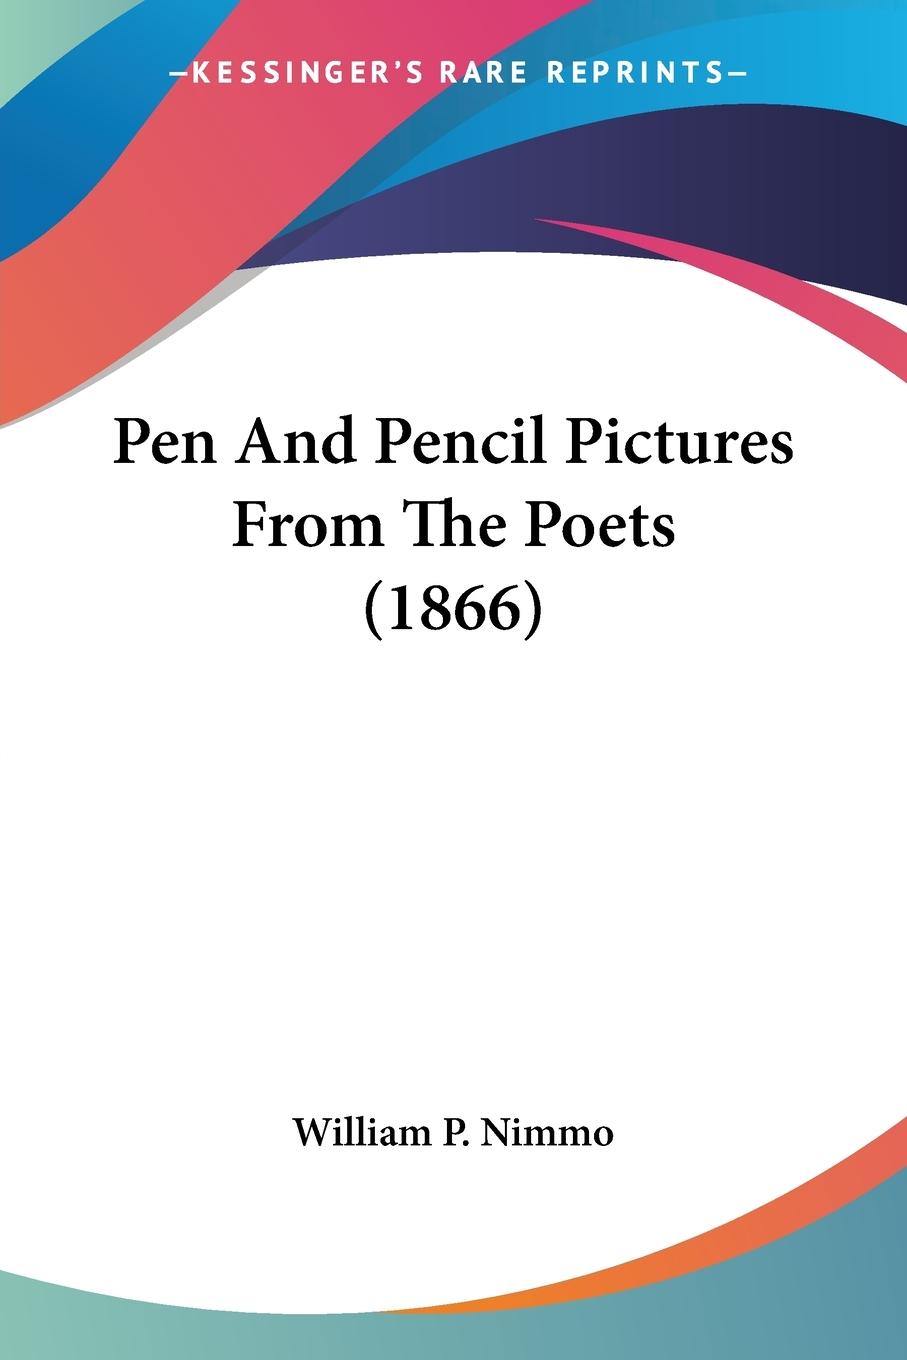 Pen And Pencil Pictures From The Poets (1866) - William P. Nimmo